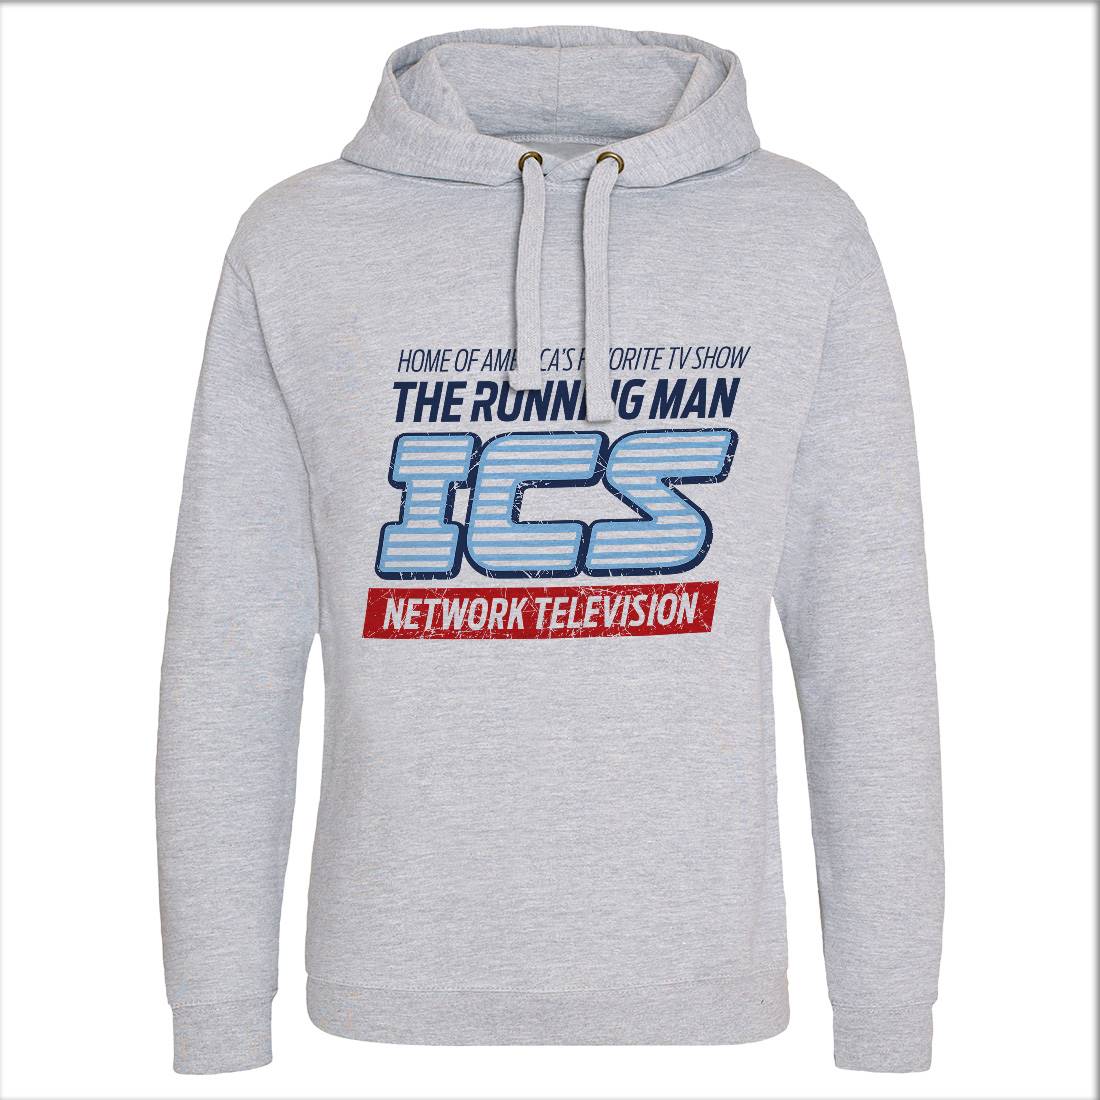 Ics Tv Mens Hoodie Without Pocket Space D363